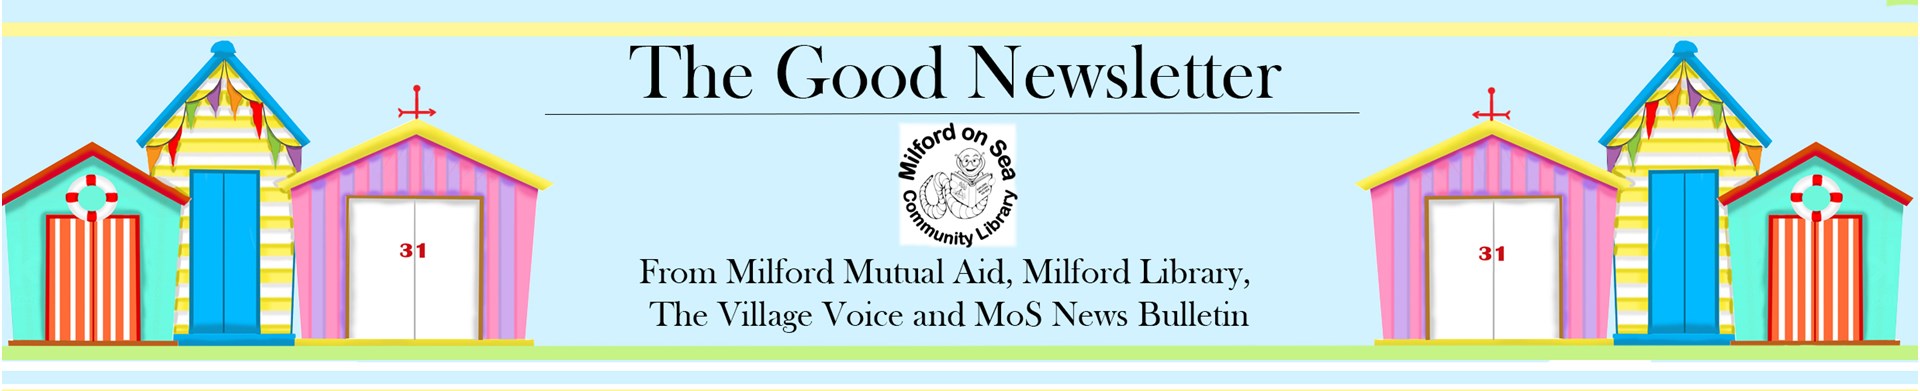 Milford on Sea Mutual Aid The Good Newsletter